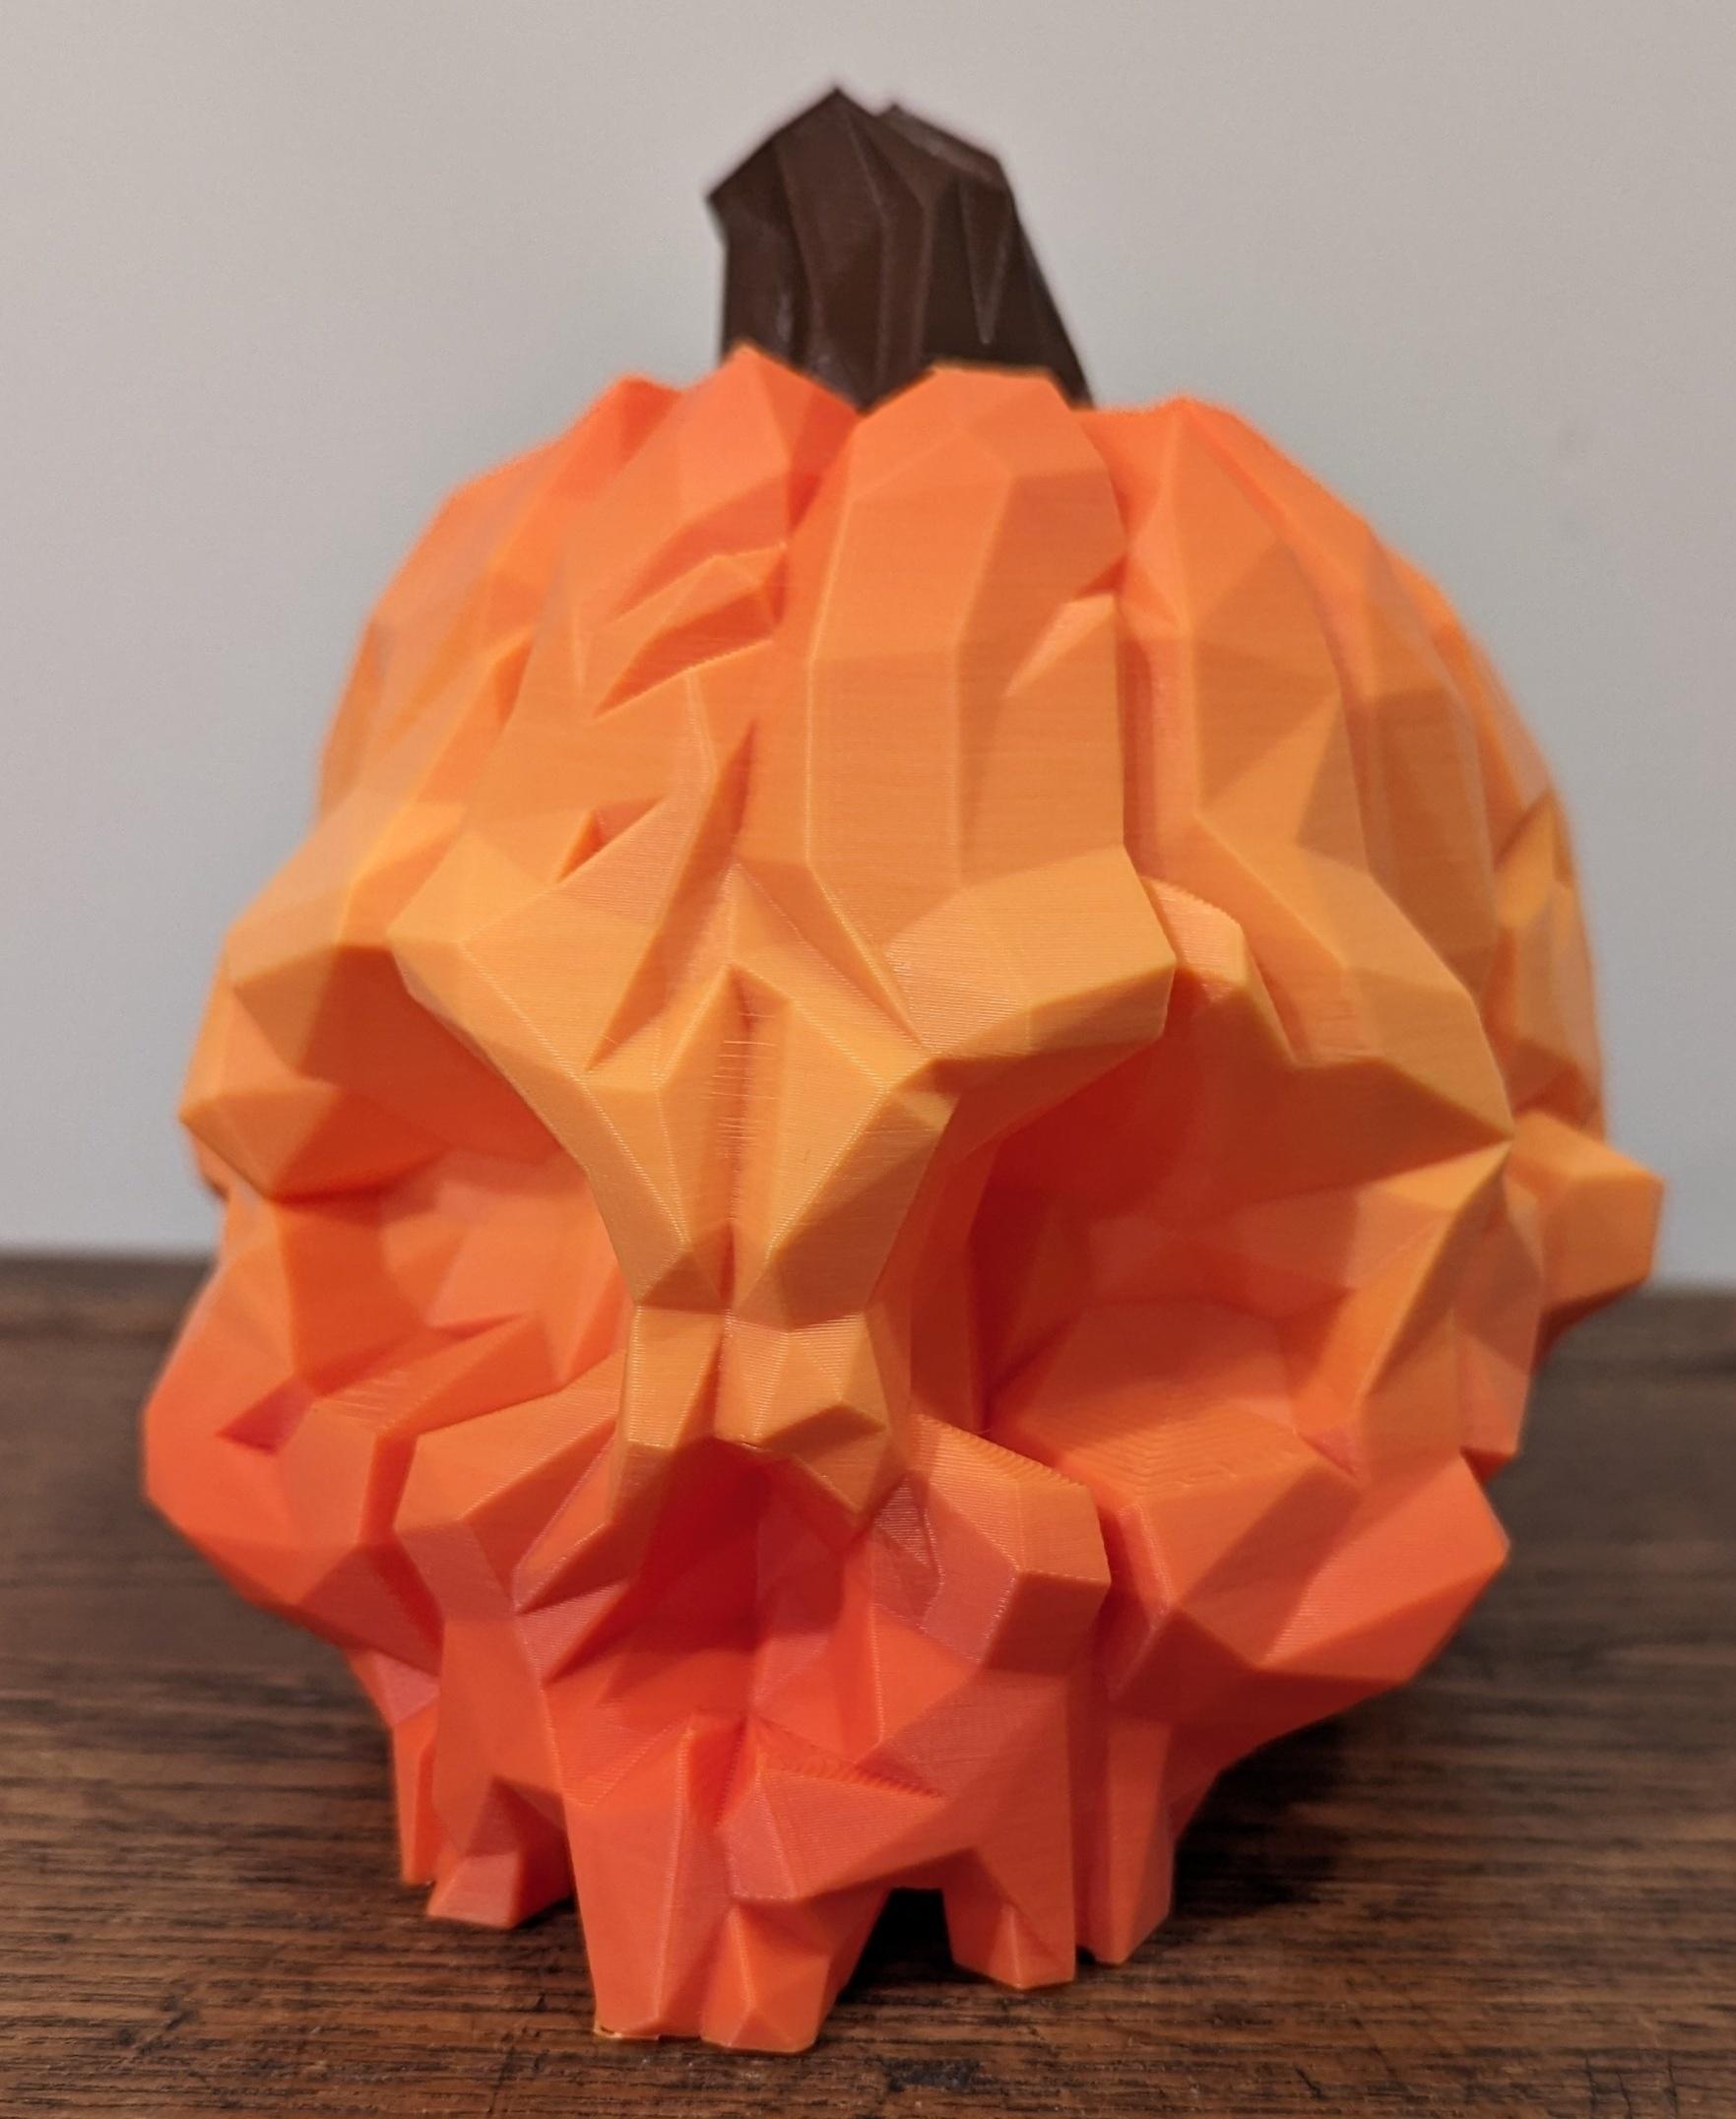 Pumpkin Skull - Low Poly - Printed in SliceWorx3D Fall Foliage and  bit of PrintedSolid Tree Brown

used lightning infill - 3d model